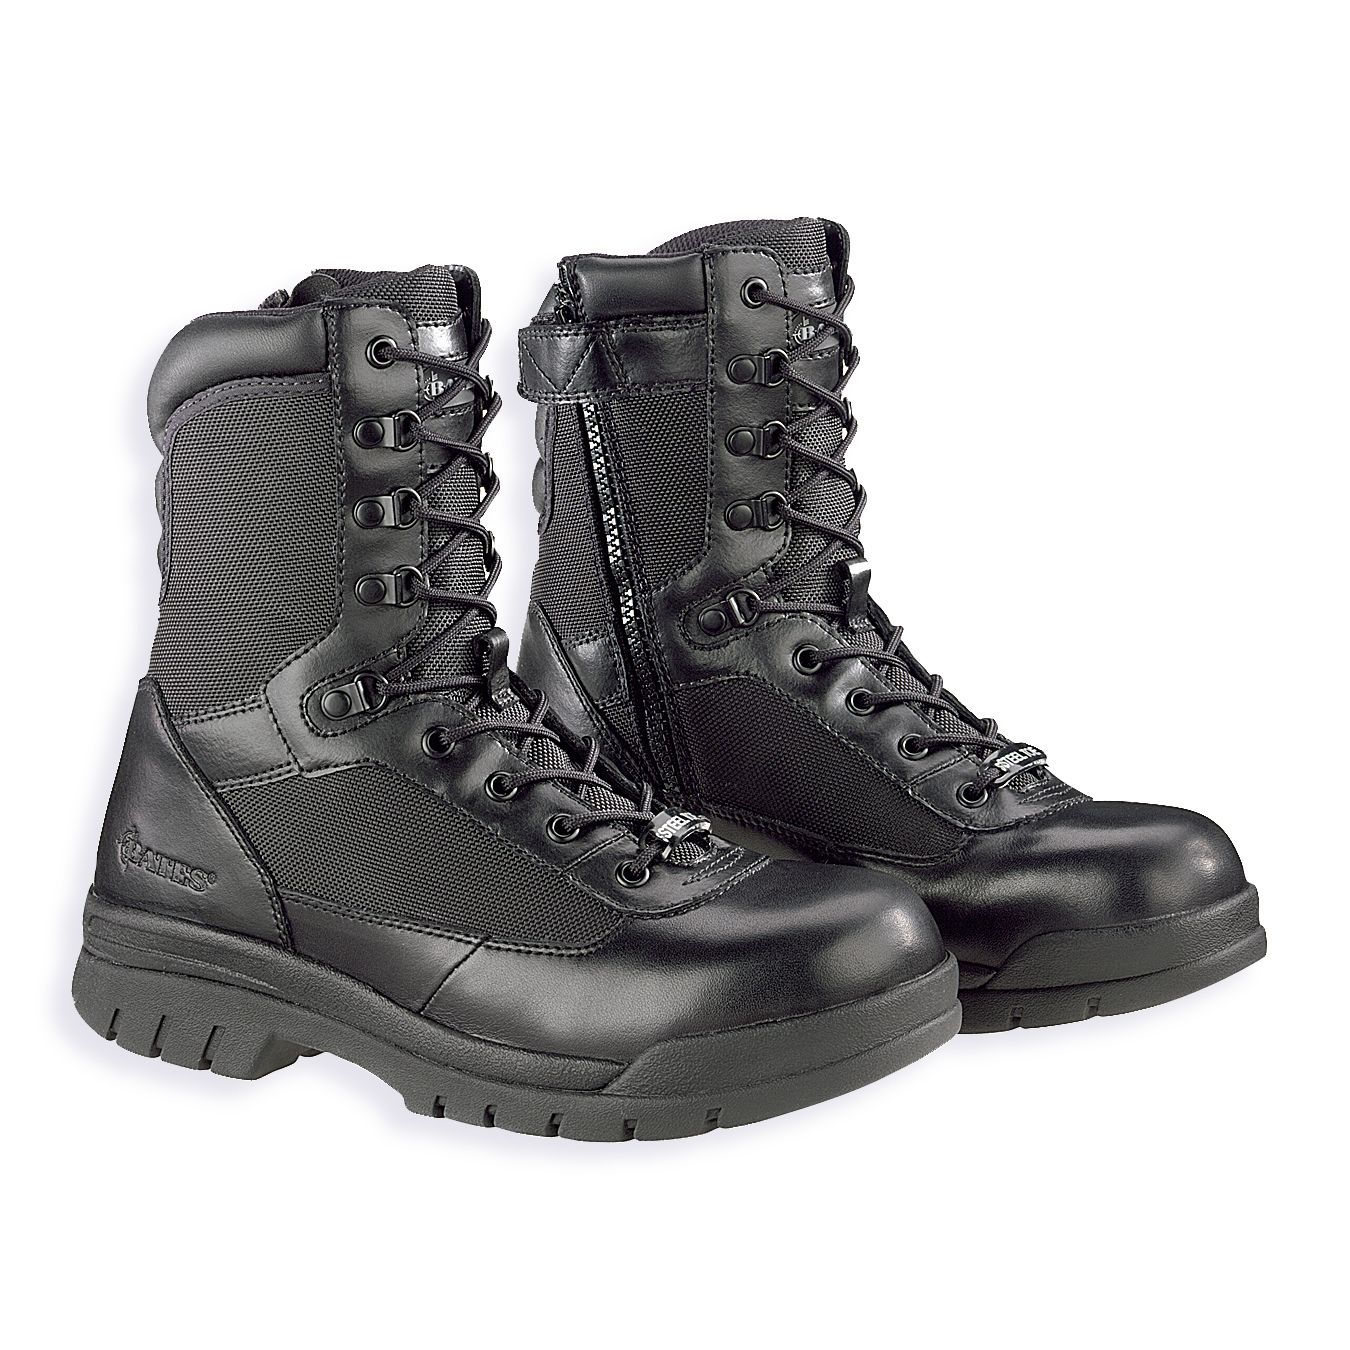 Men's Enforcer Series Safety Toe 8" Tactical Protective Boot